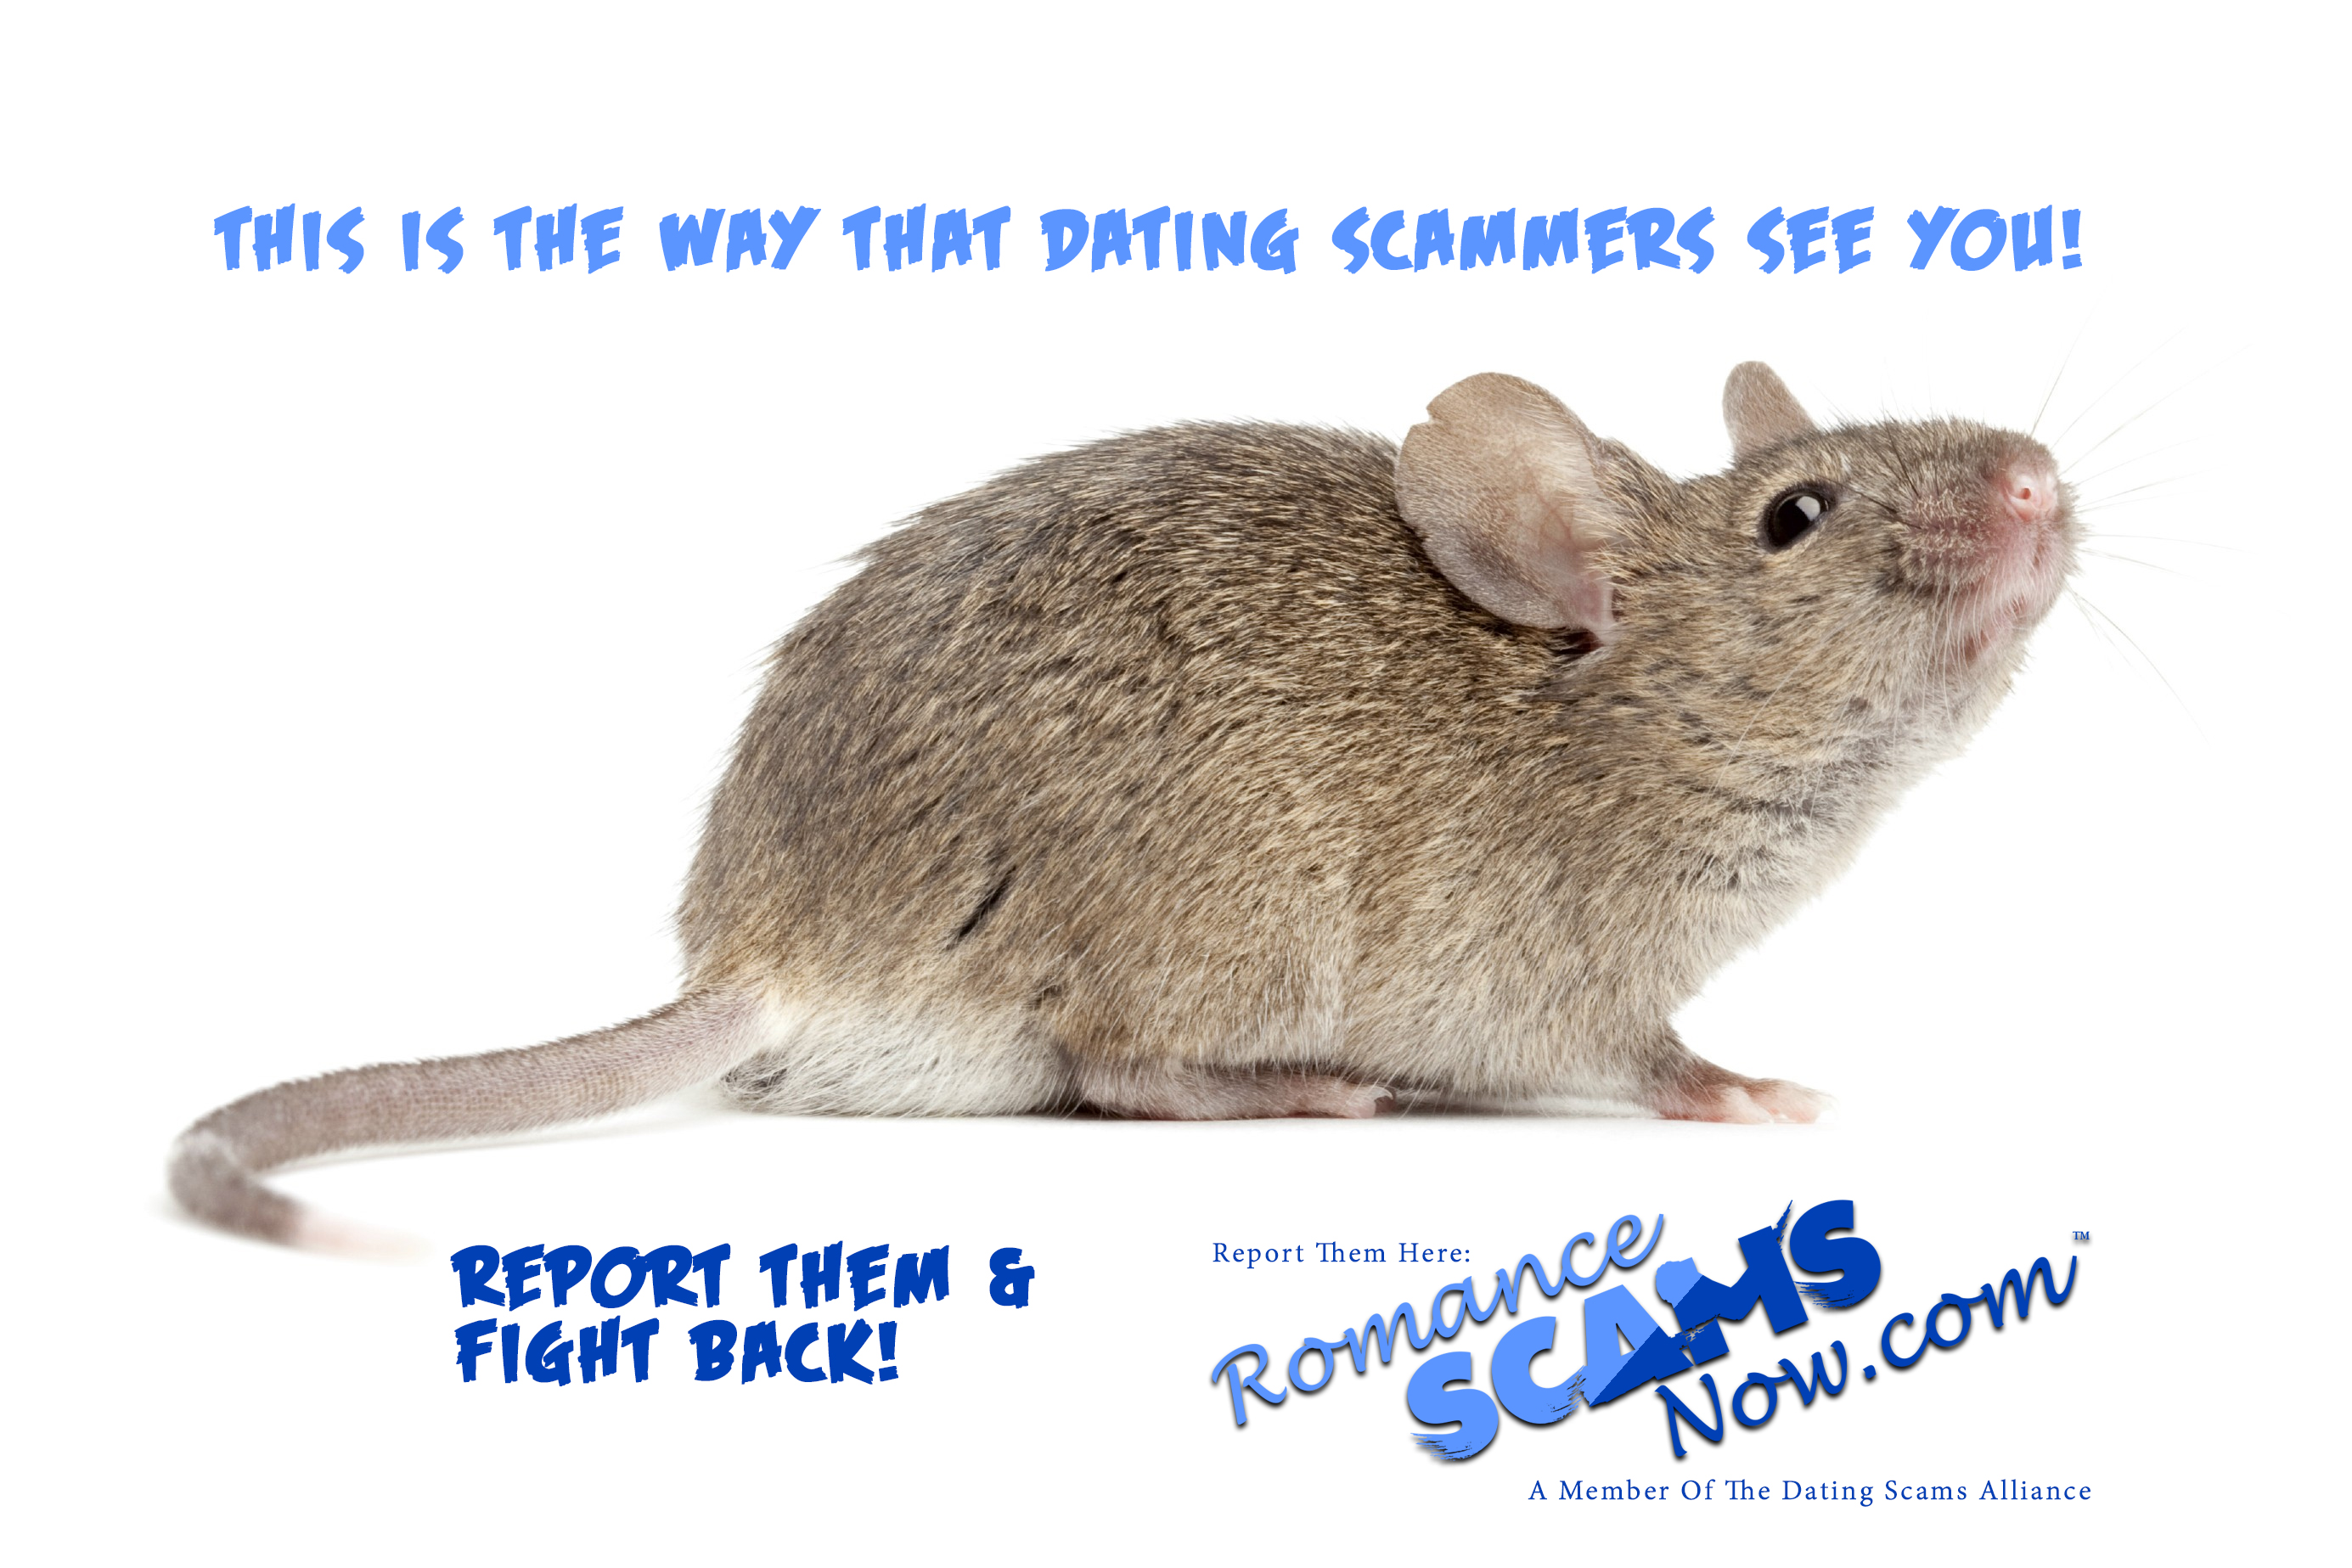 SCARS ™ / RSN™ Anti-Scam Poster 35